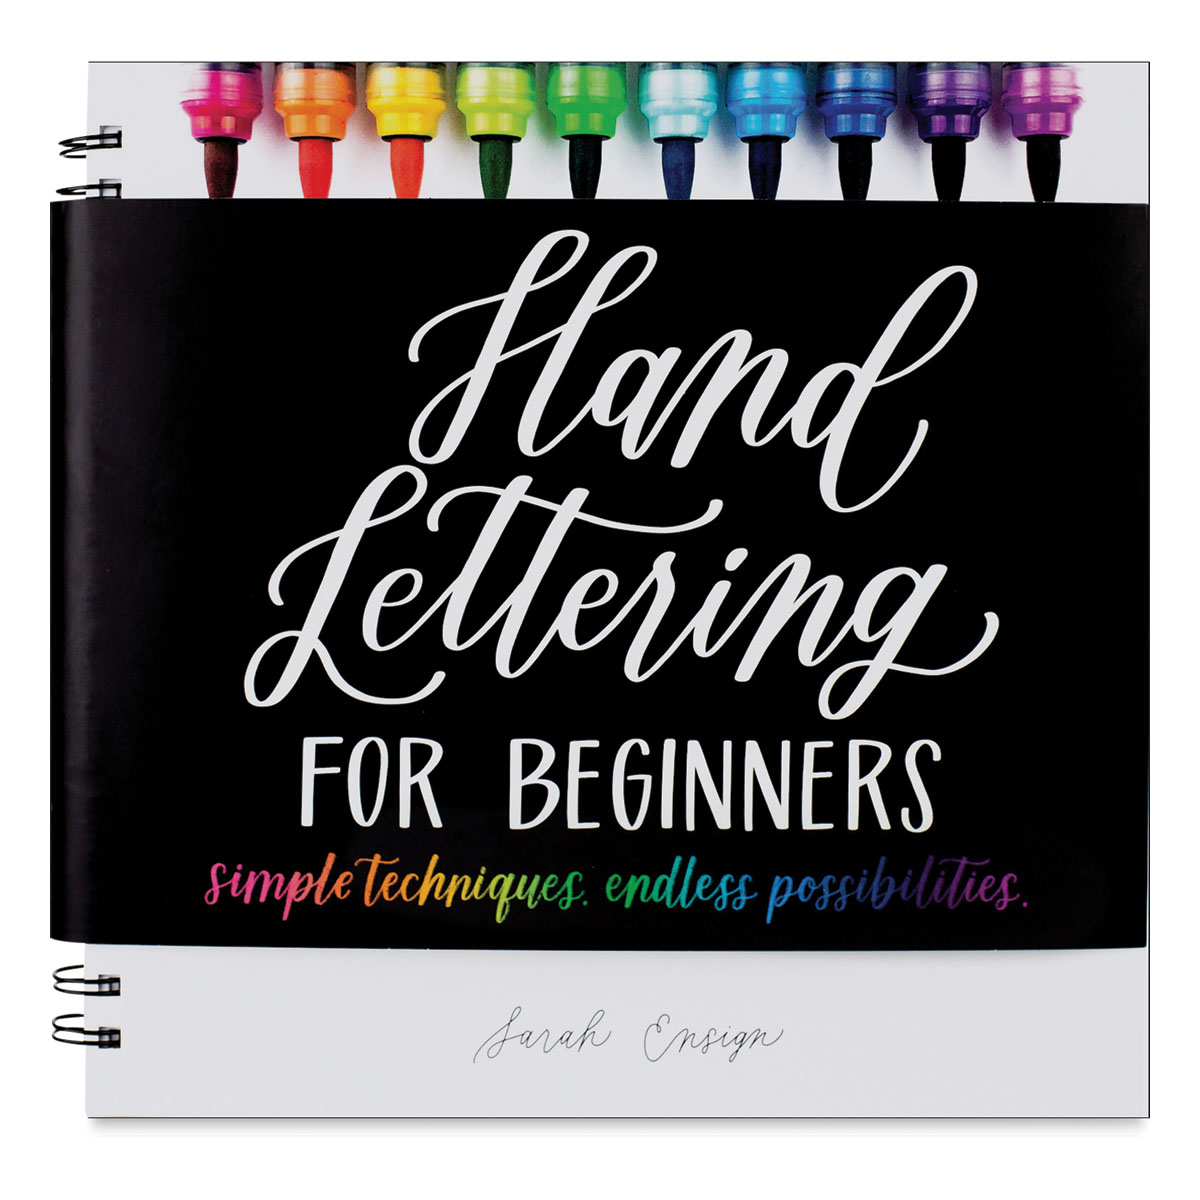 Lettering and Calligraphy Books